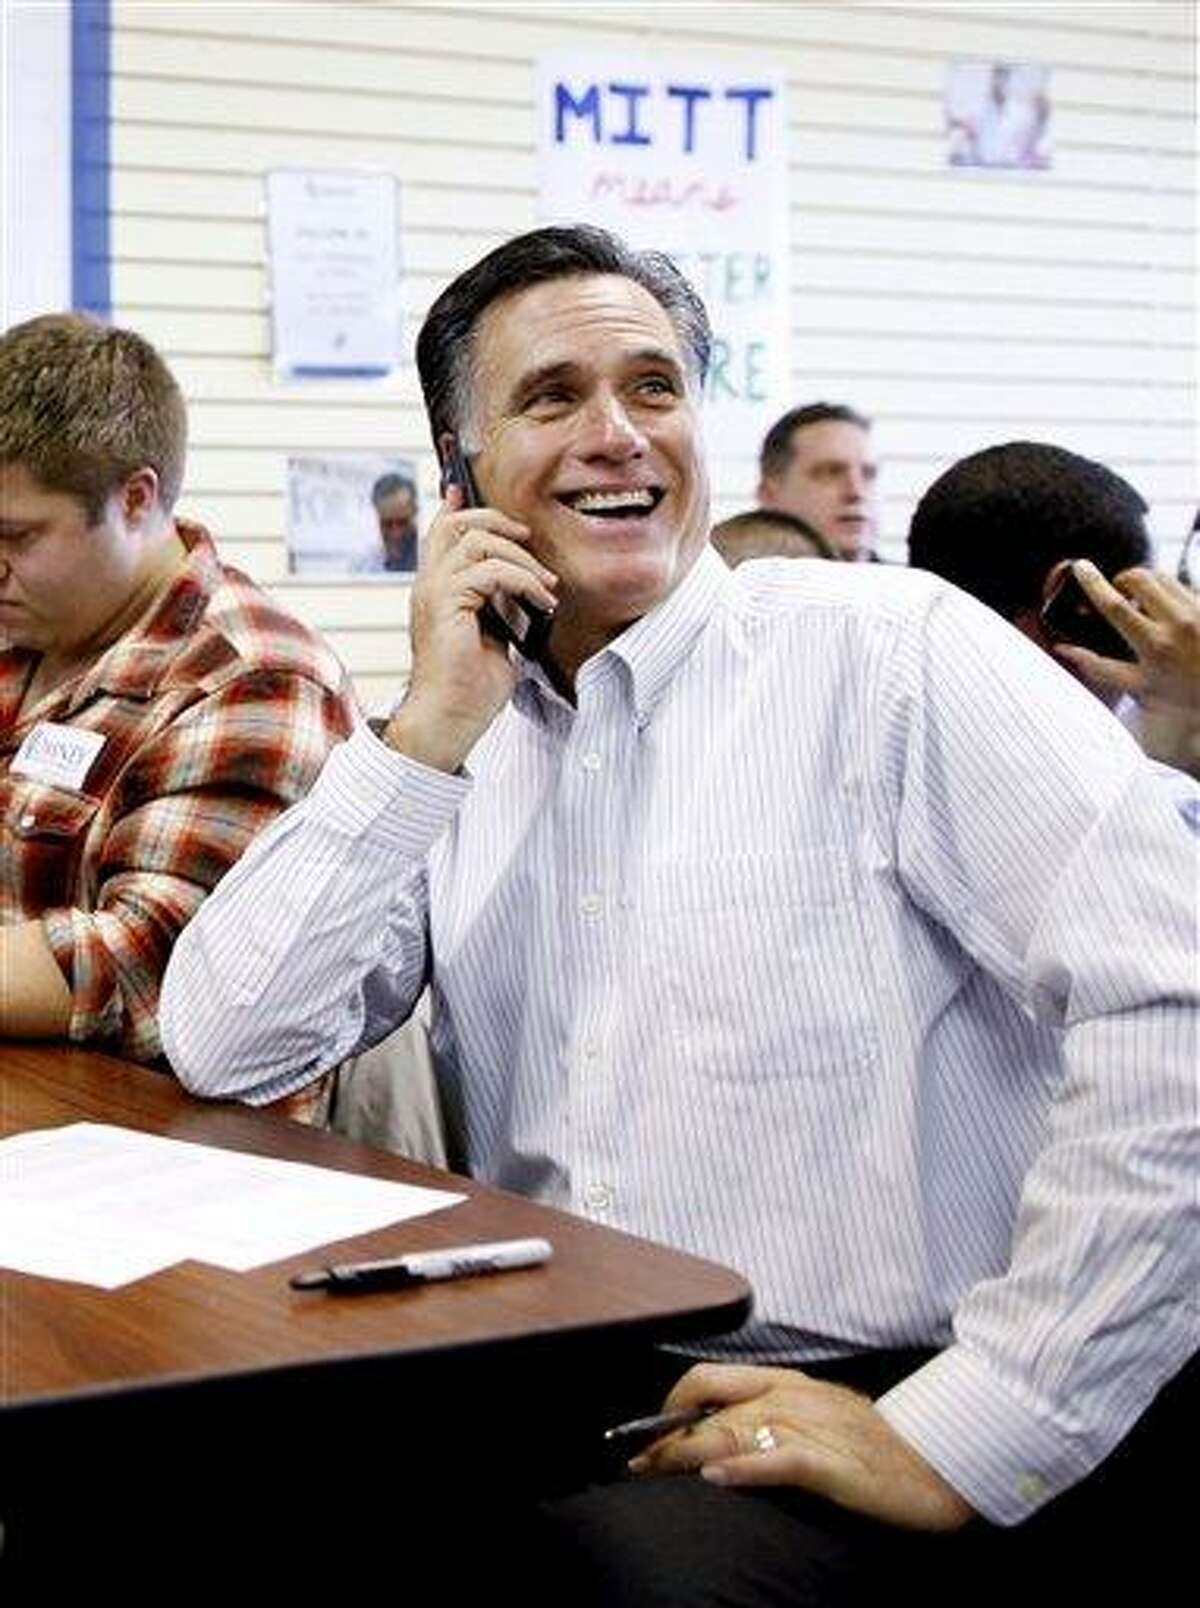 Republican presidential candidate and former Massachusetts Gov. Mitt Romney sits with volunteers and calls likely voters ahead of Tuesday's primary election in Manchester, N.H. Associated Press